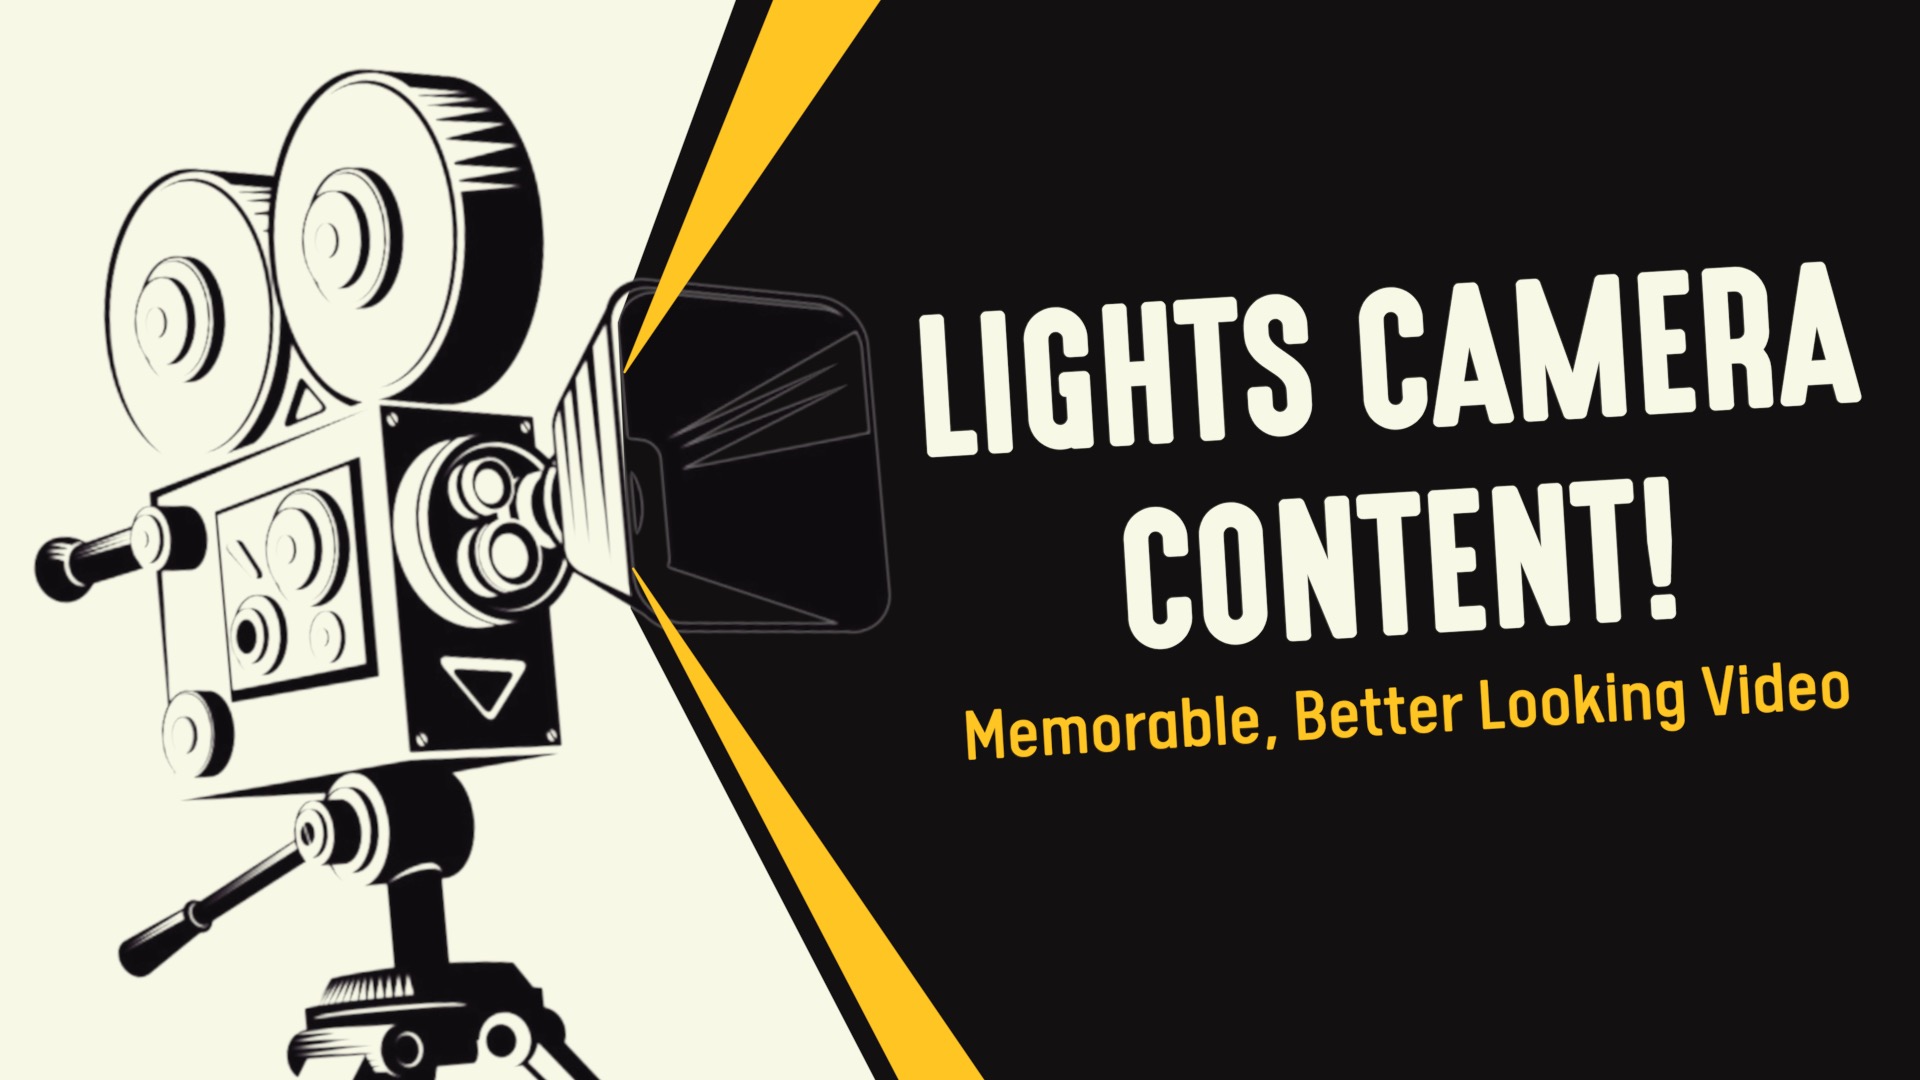 Lights. Camera. Content! The Undeniable Power of Audio